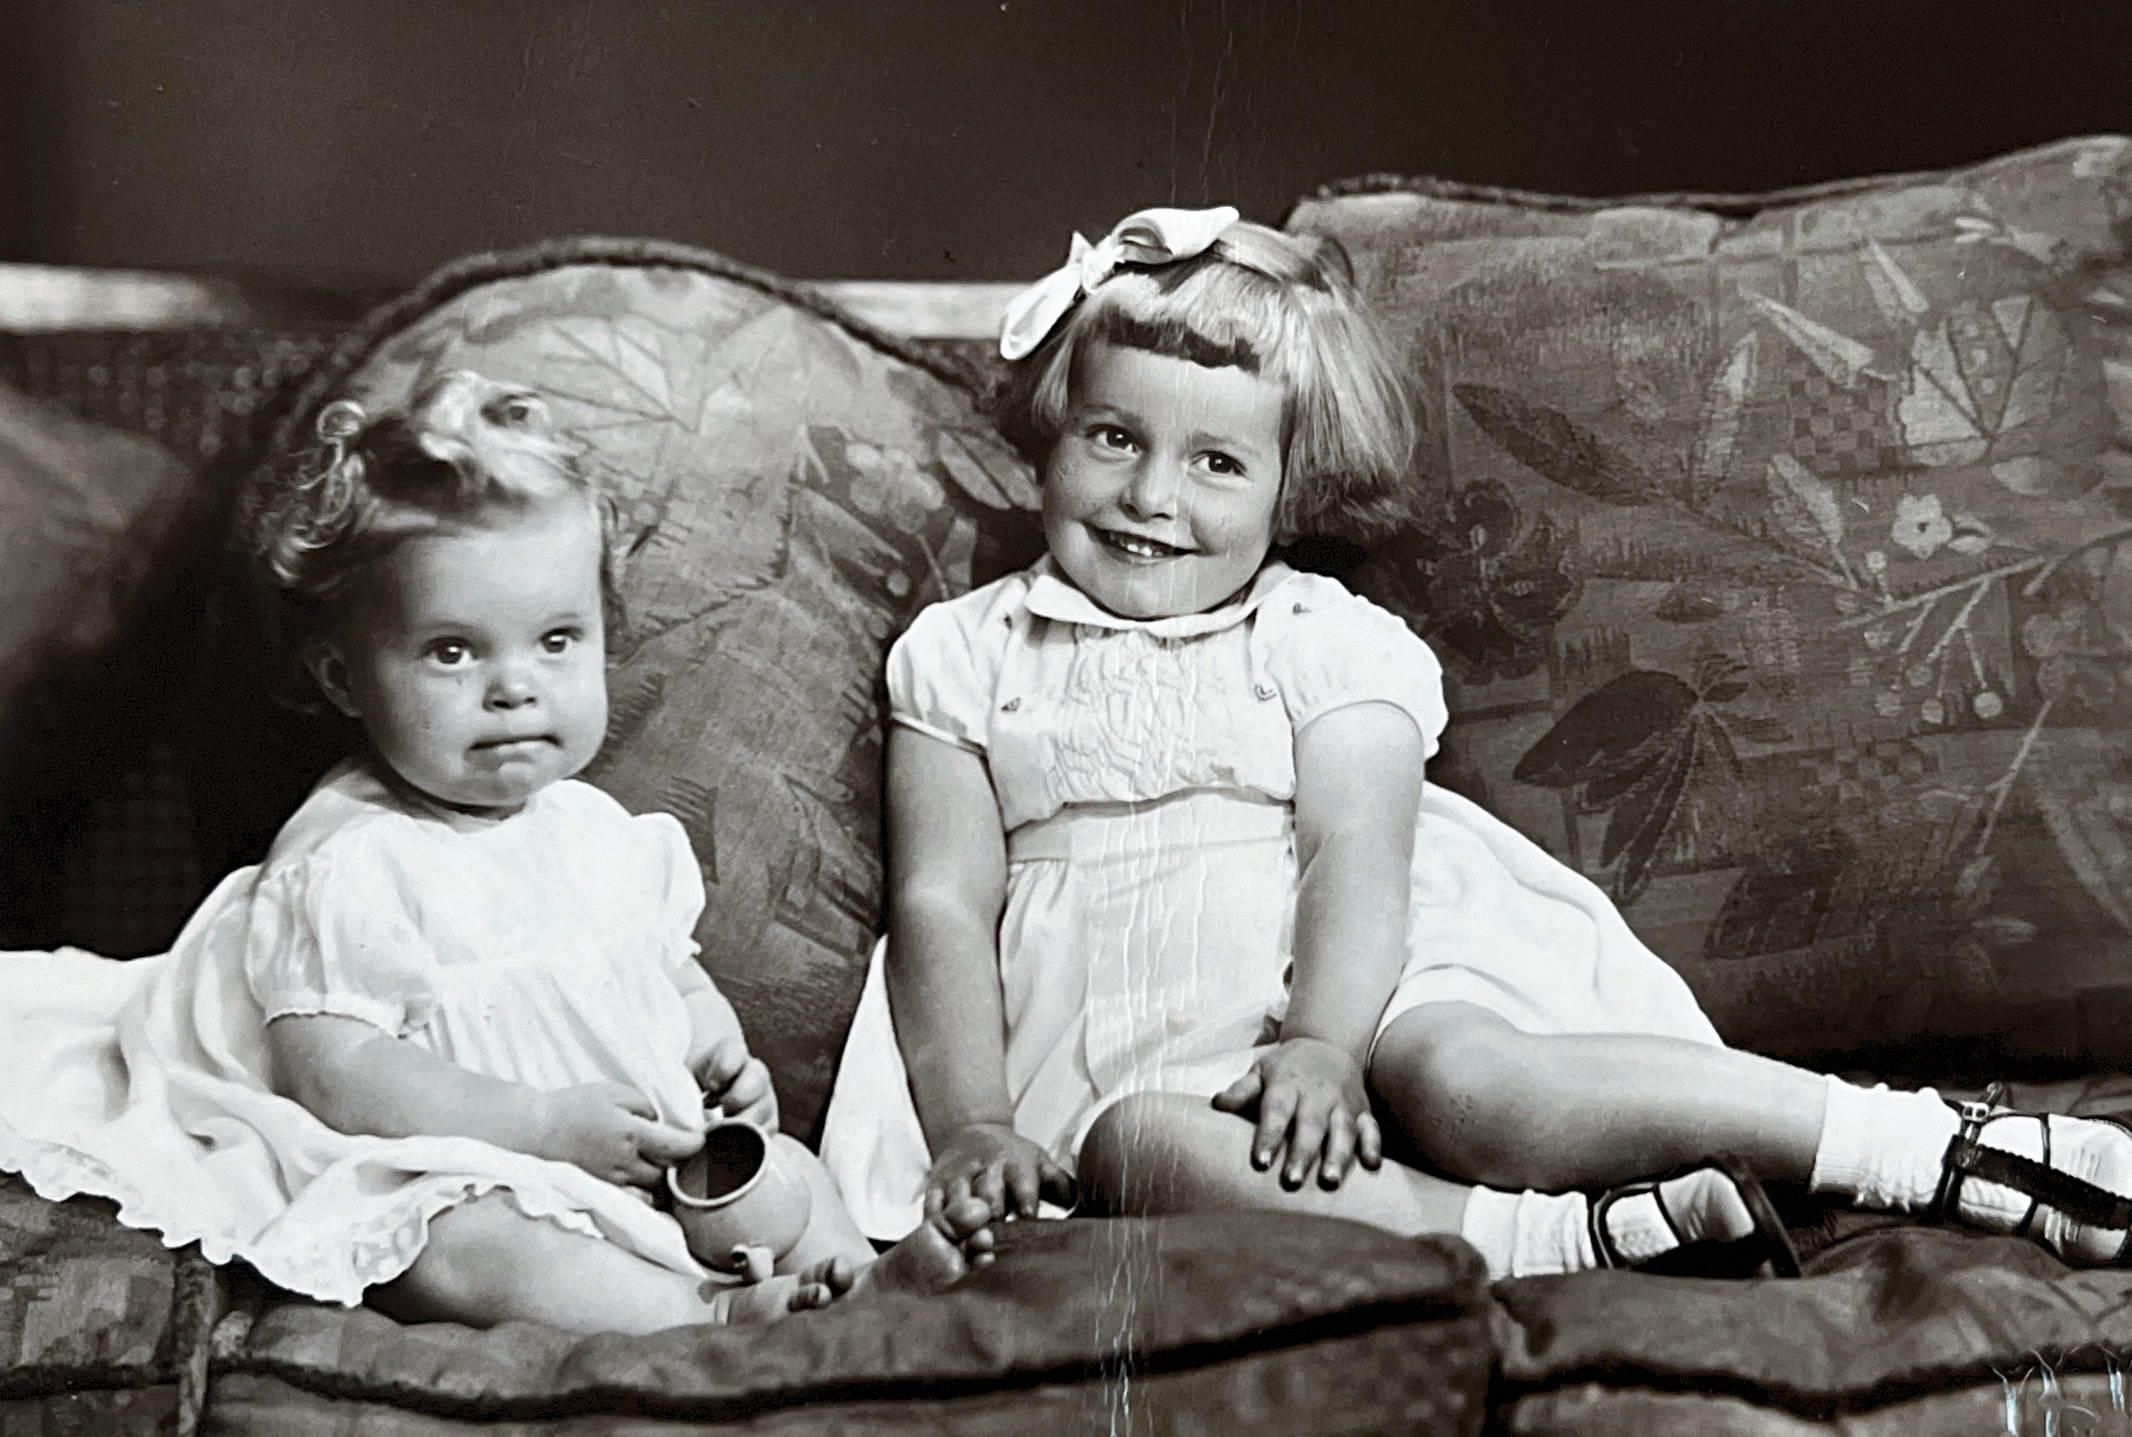 This photo was taken in July 1942 when Dorothy was nearly 3 and Valerie was almost 1